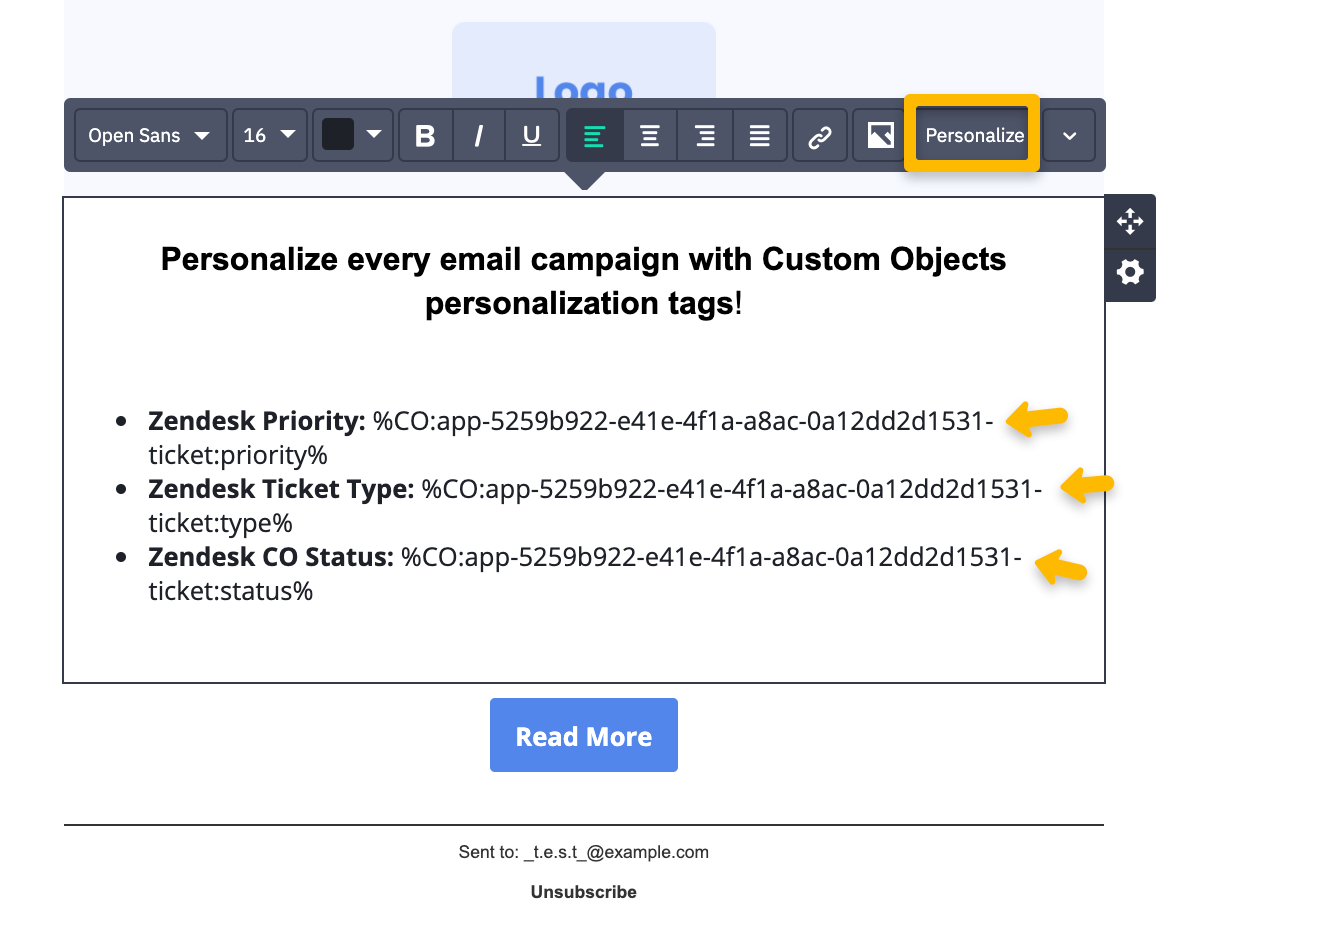 Personalize emails with Custom Objects